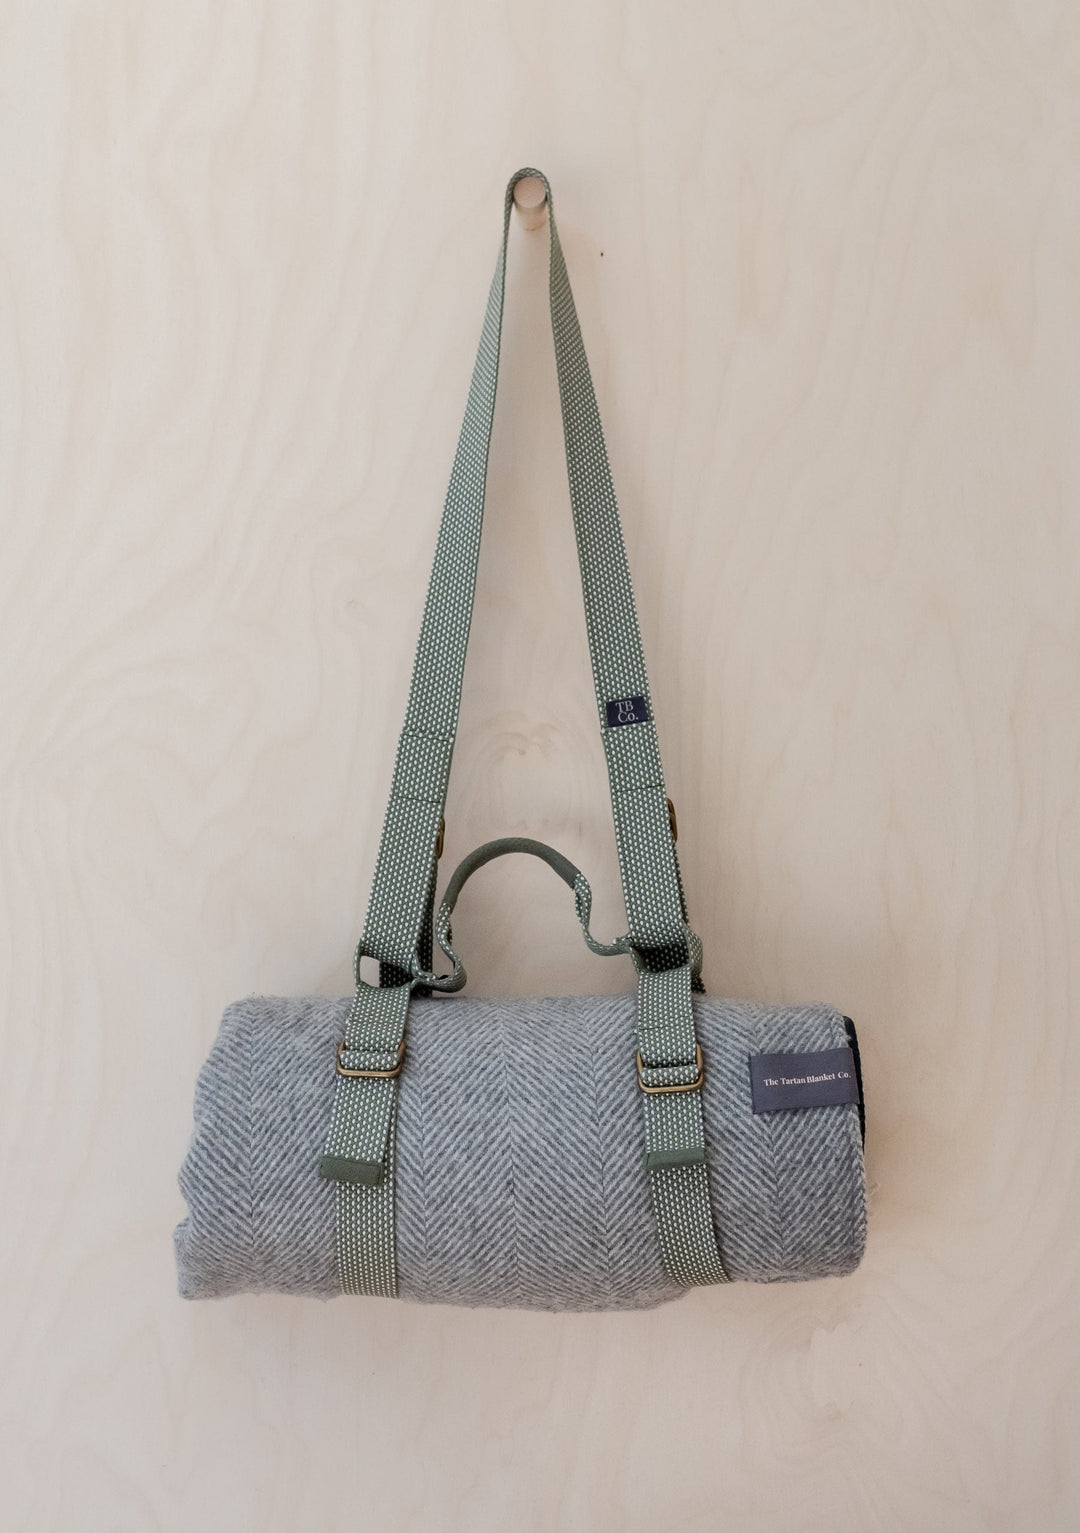 Recycled Picnic Carrier with Shoulder Strap